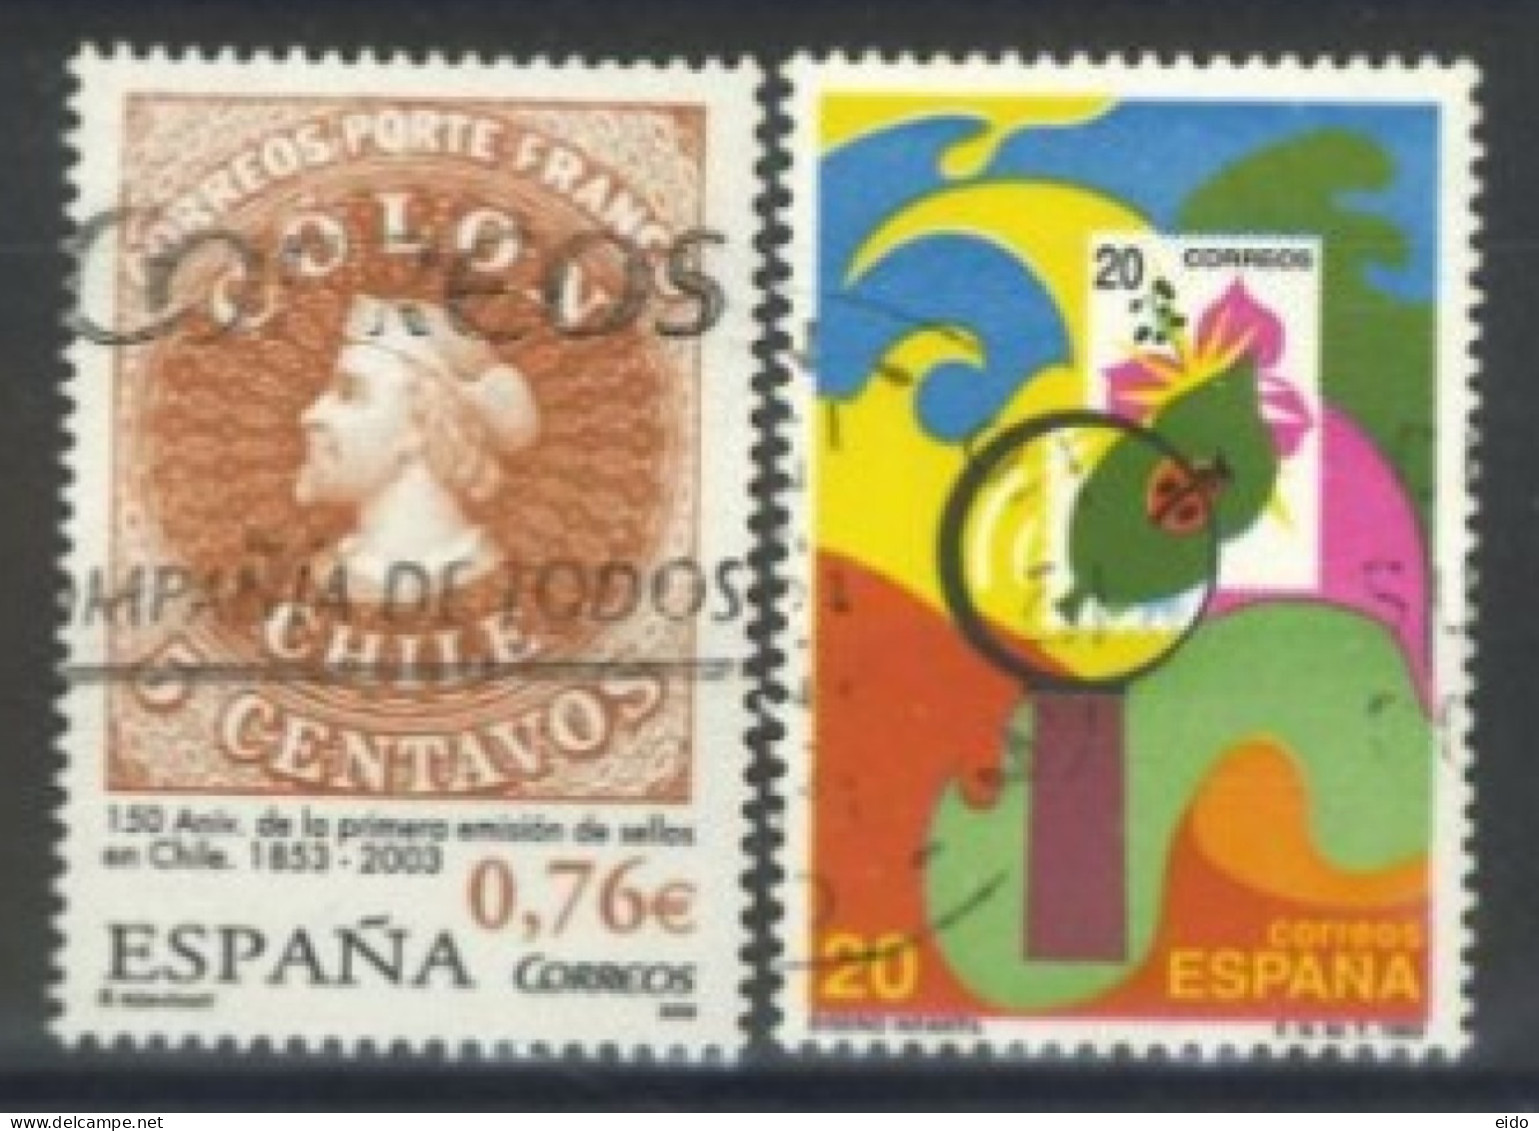 SPAIN,1989/2003, STAMP COLLECTING & CHILEAN POSTAGE STAMPS SET OF 2, # 2592, 3227, USED. - Usati